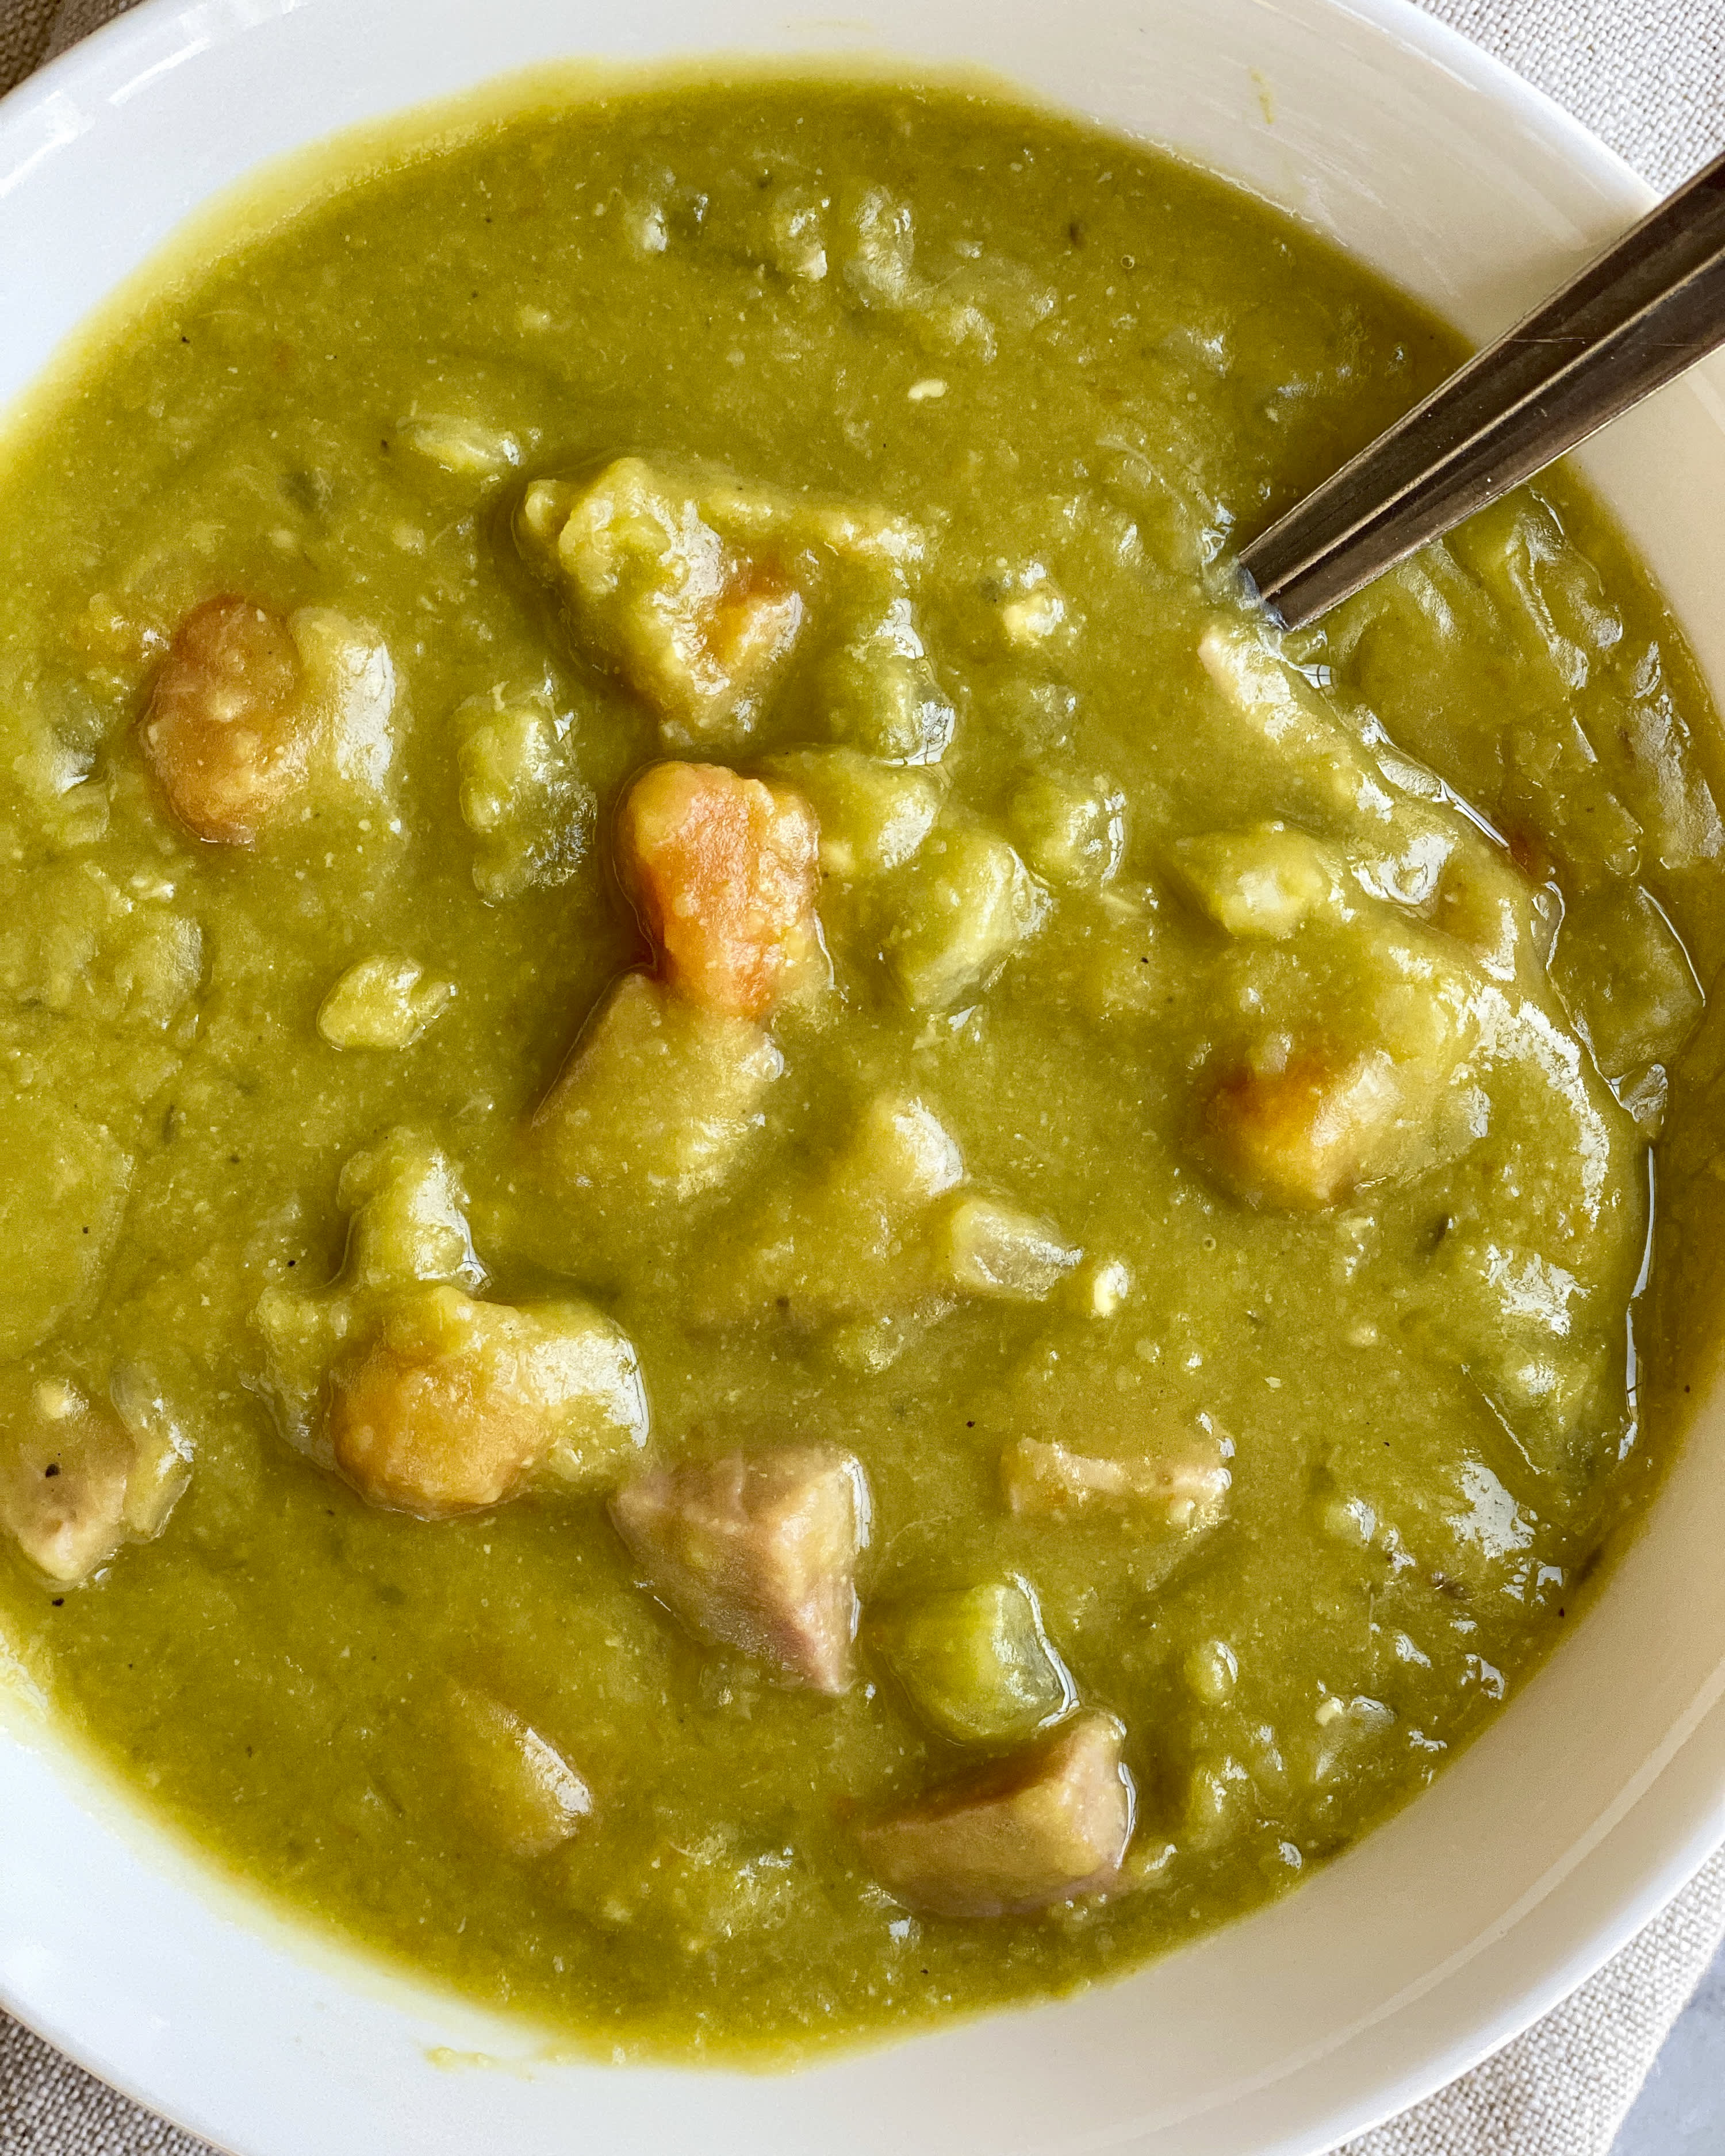 Green Pea Soup (Dairy-Free + 6 Ingredients!) - From My Bowl